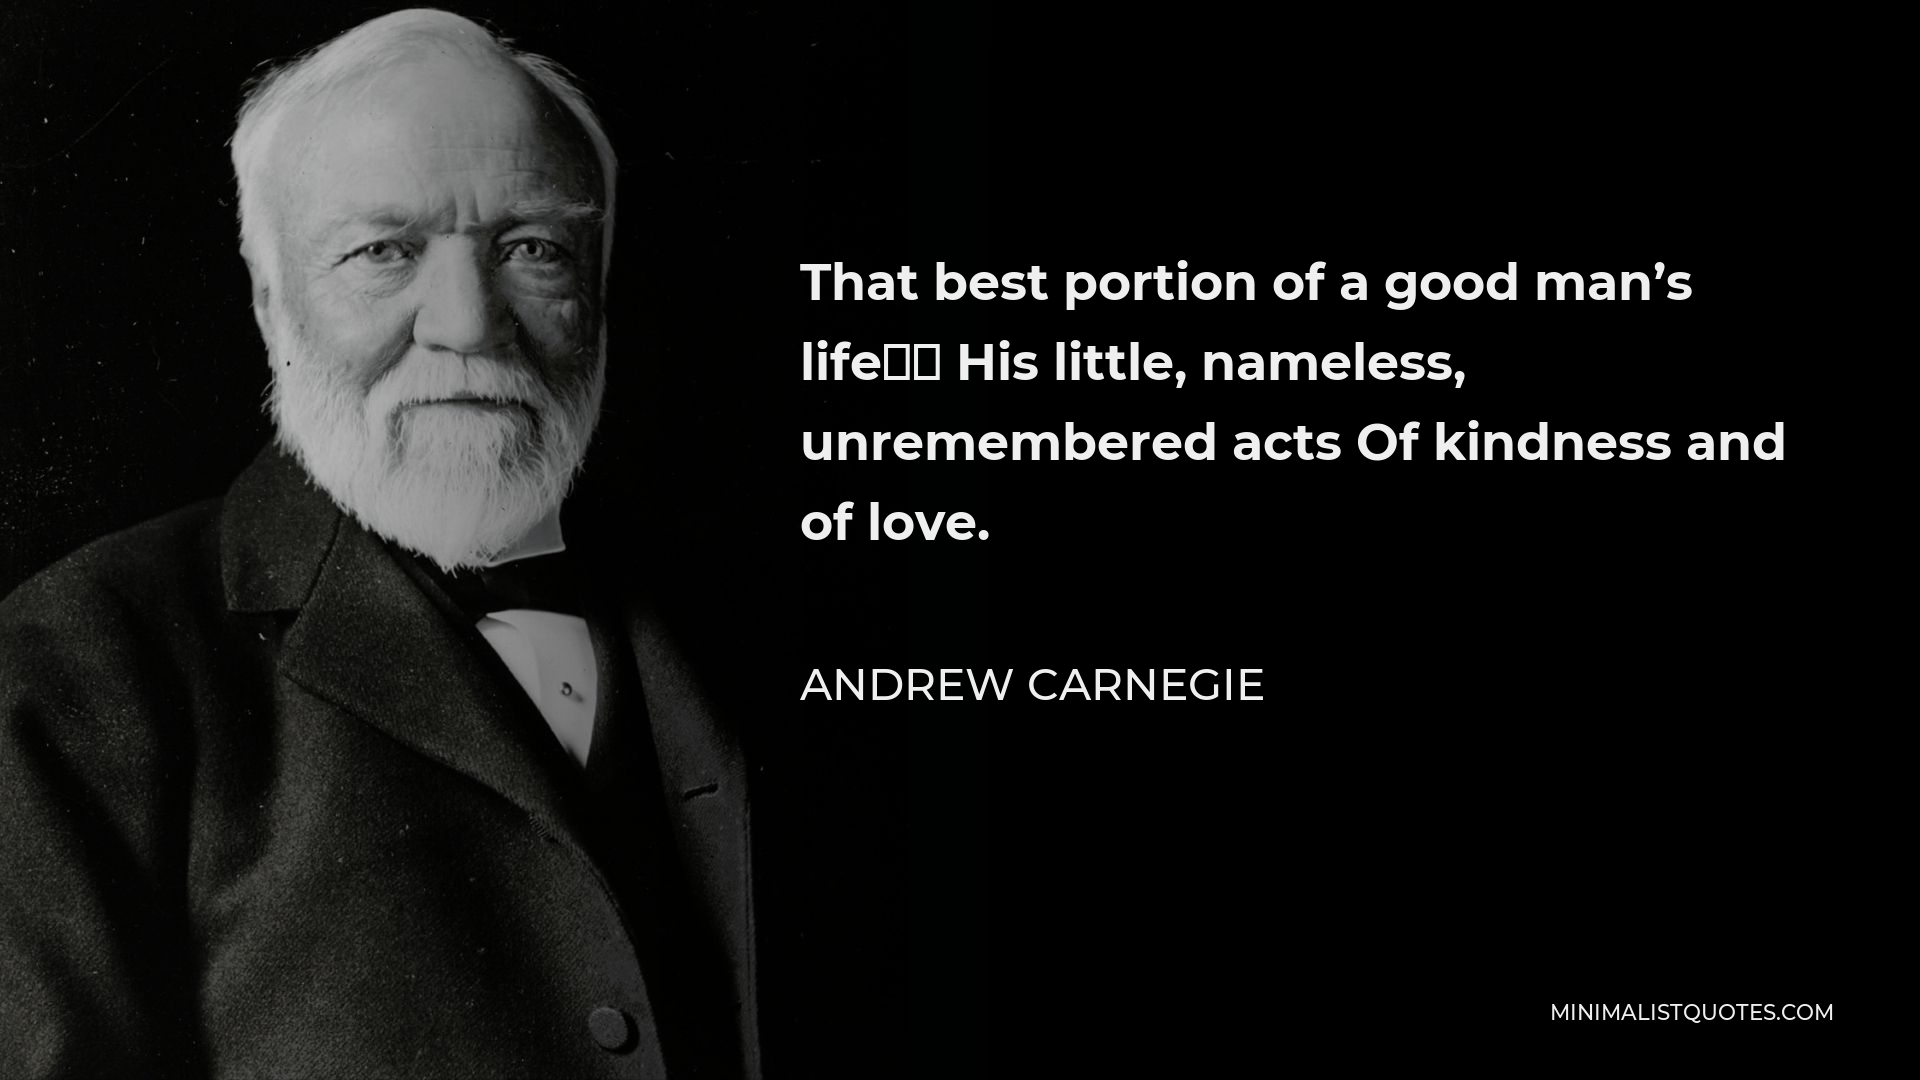 Andrew Carnegie Quote - That best portion of a good man’s life— His little, nameless, unremembered acts Of kindness and of love.